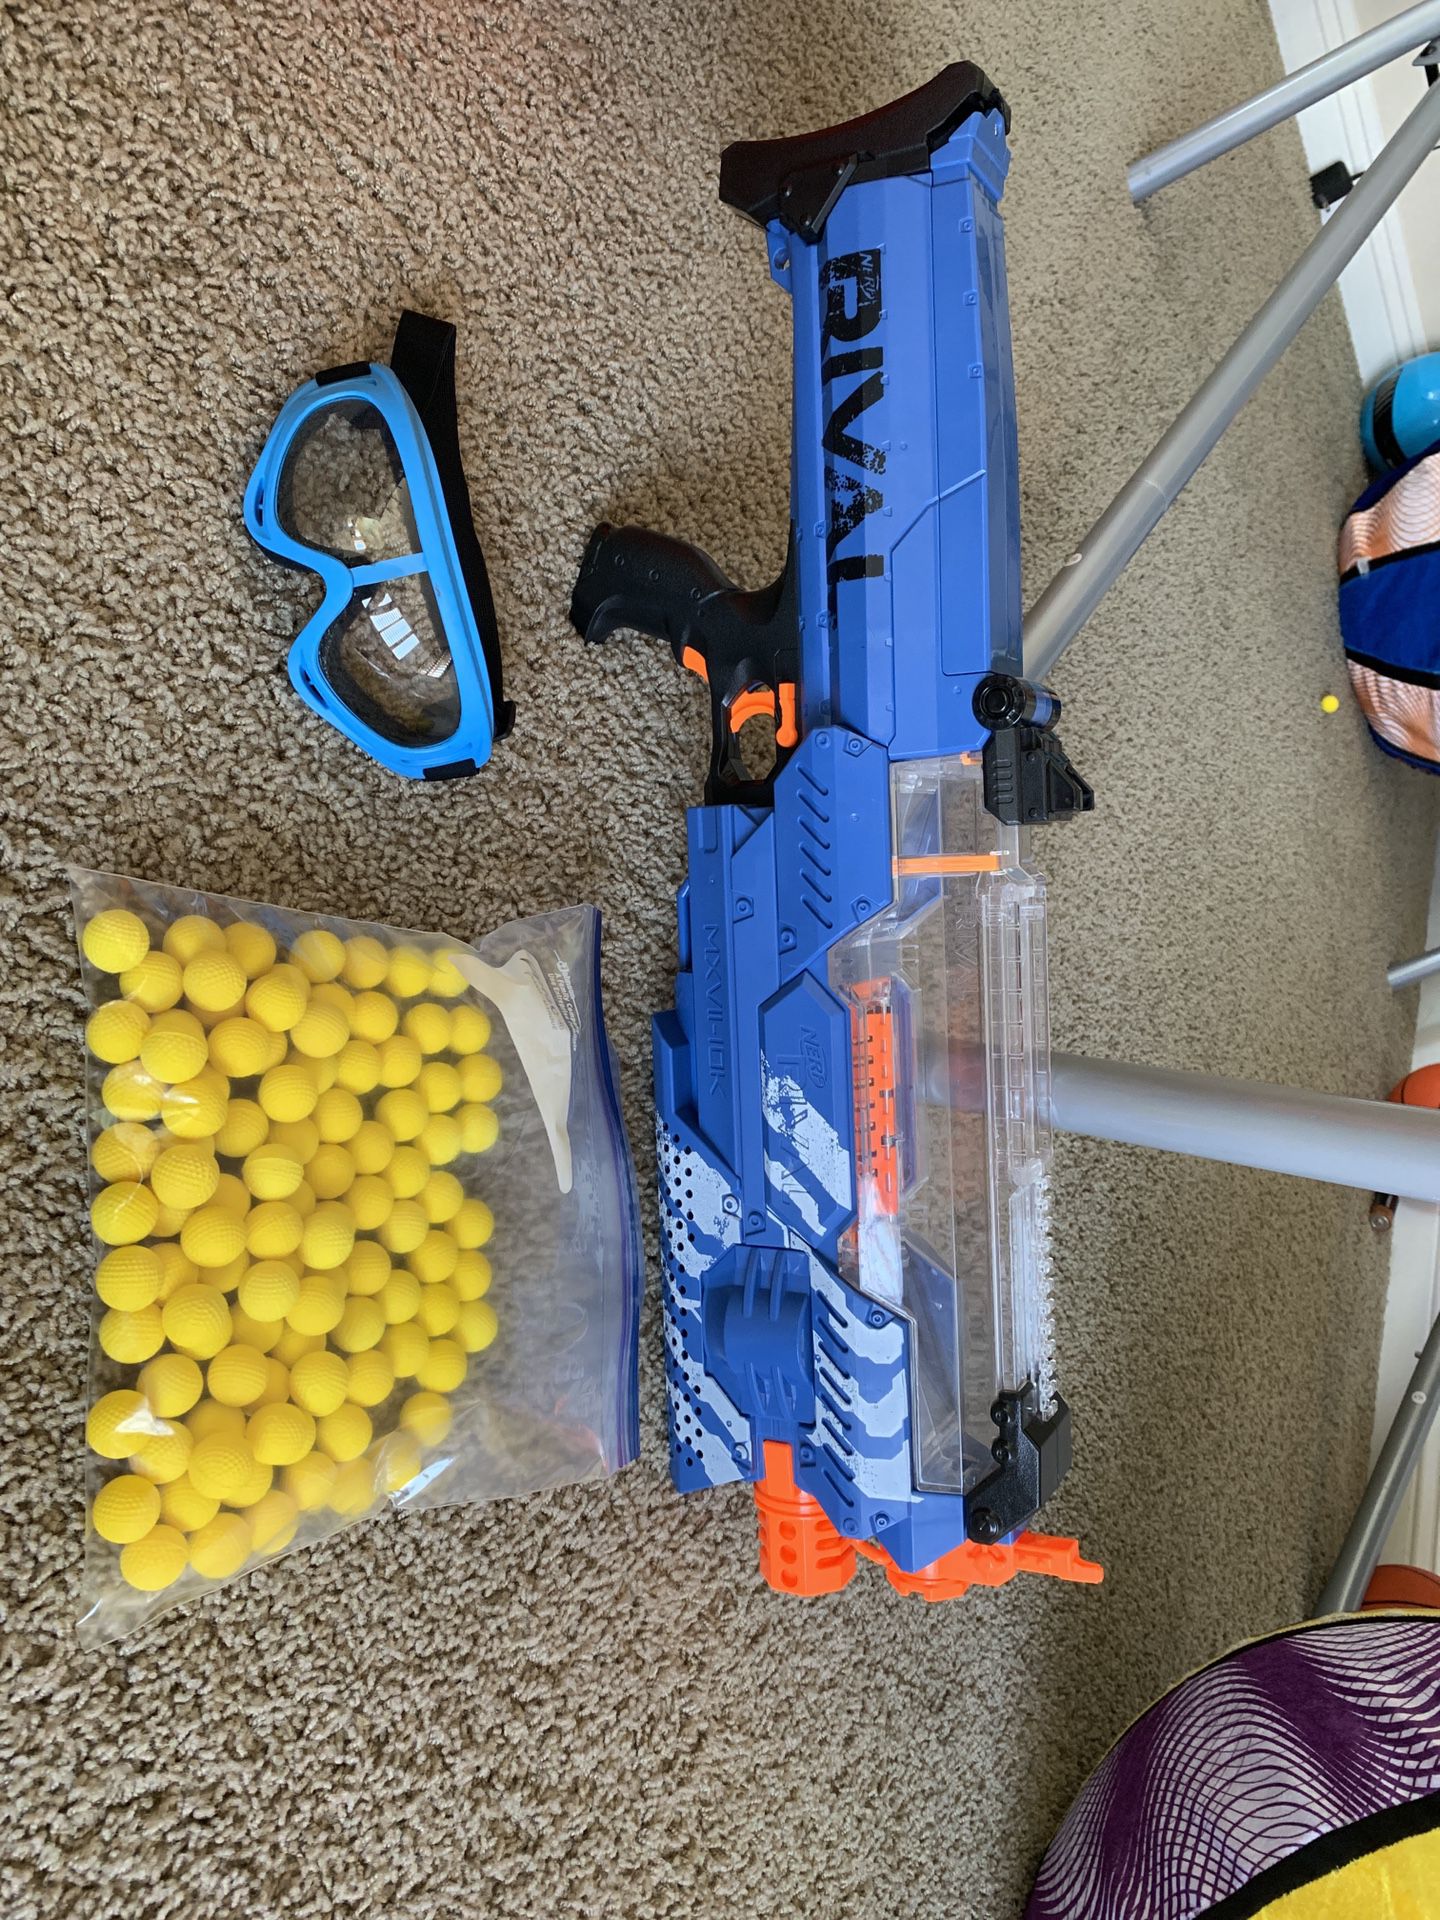 Nerf Rival Nemesis Gun with bullets and safety goggles